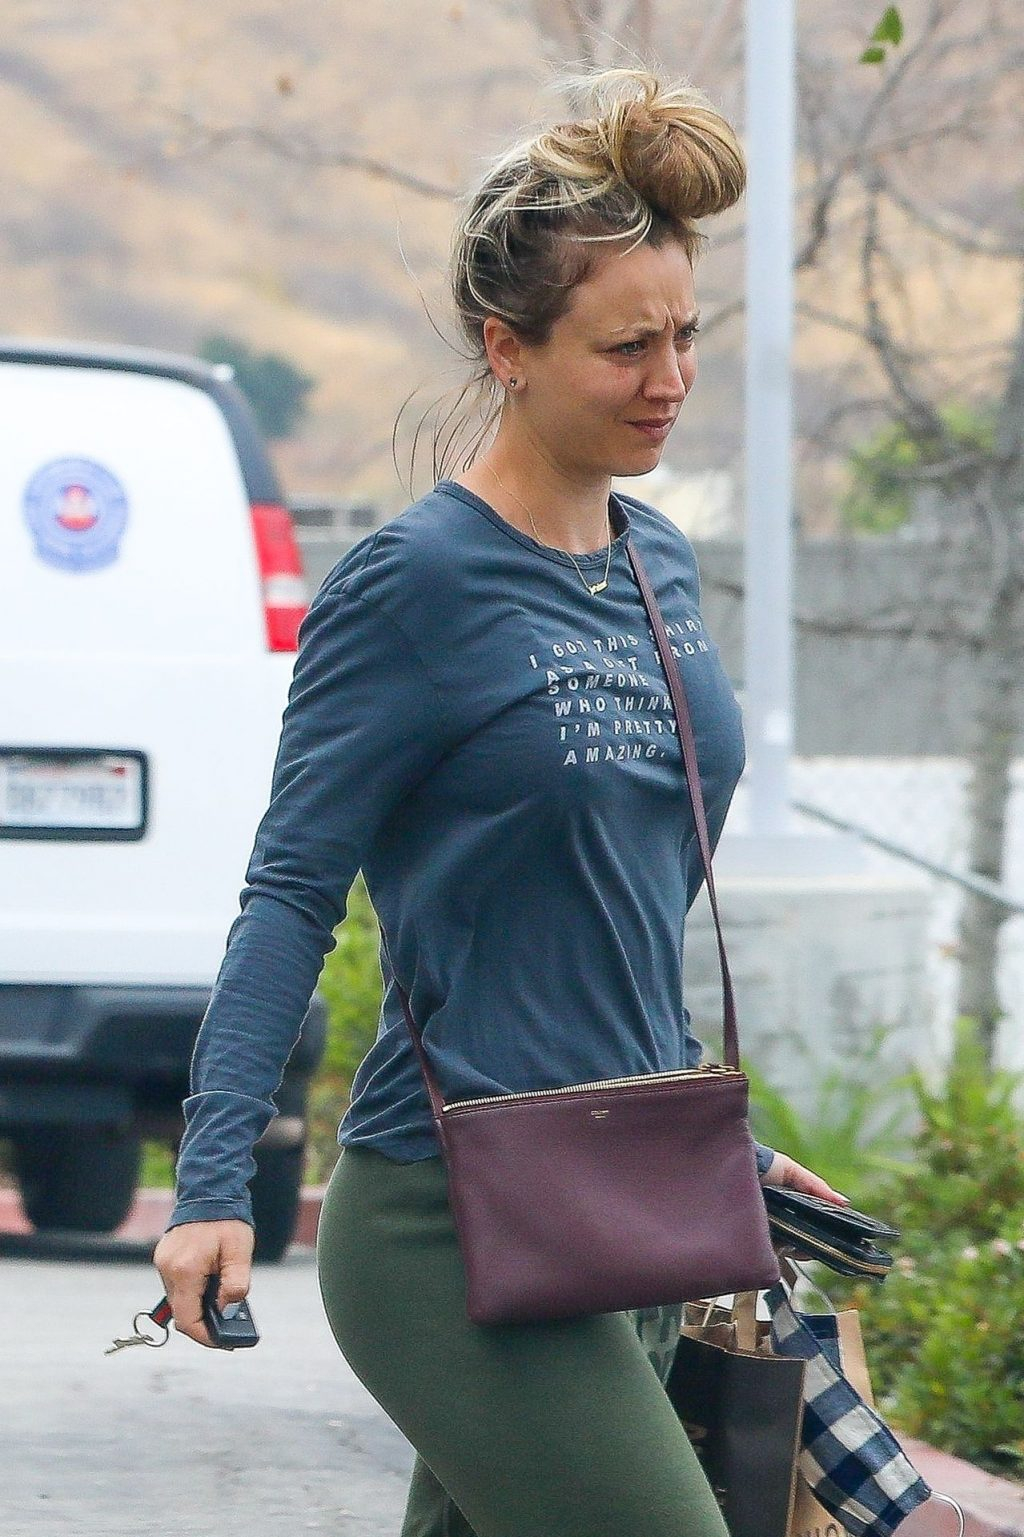 Kaley Cuoco Appears To Have A Bad Hair Day While Grocery 